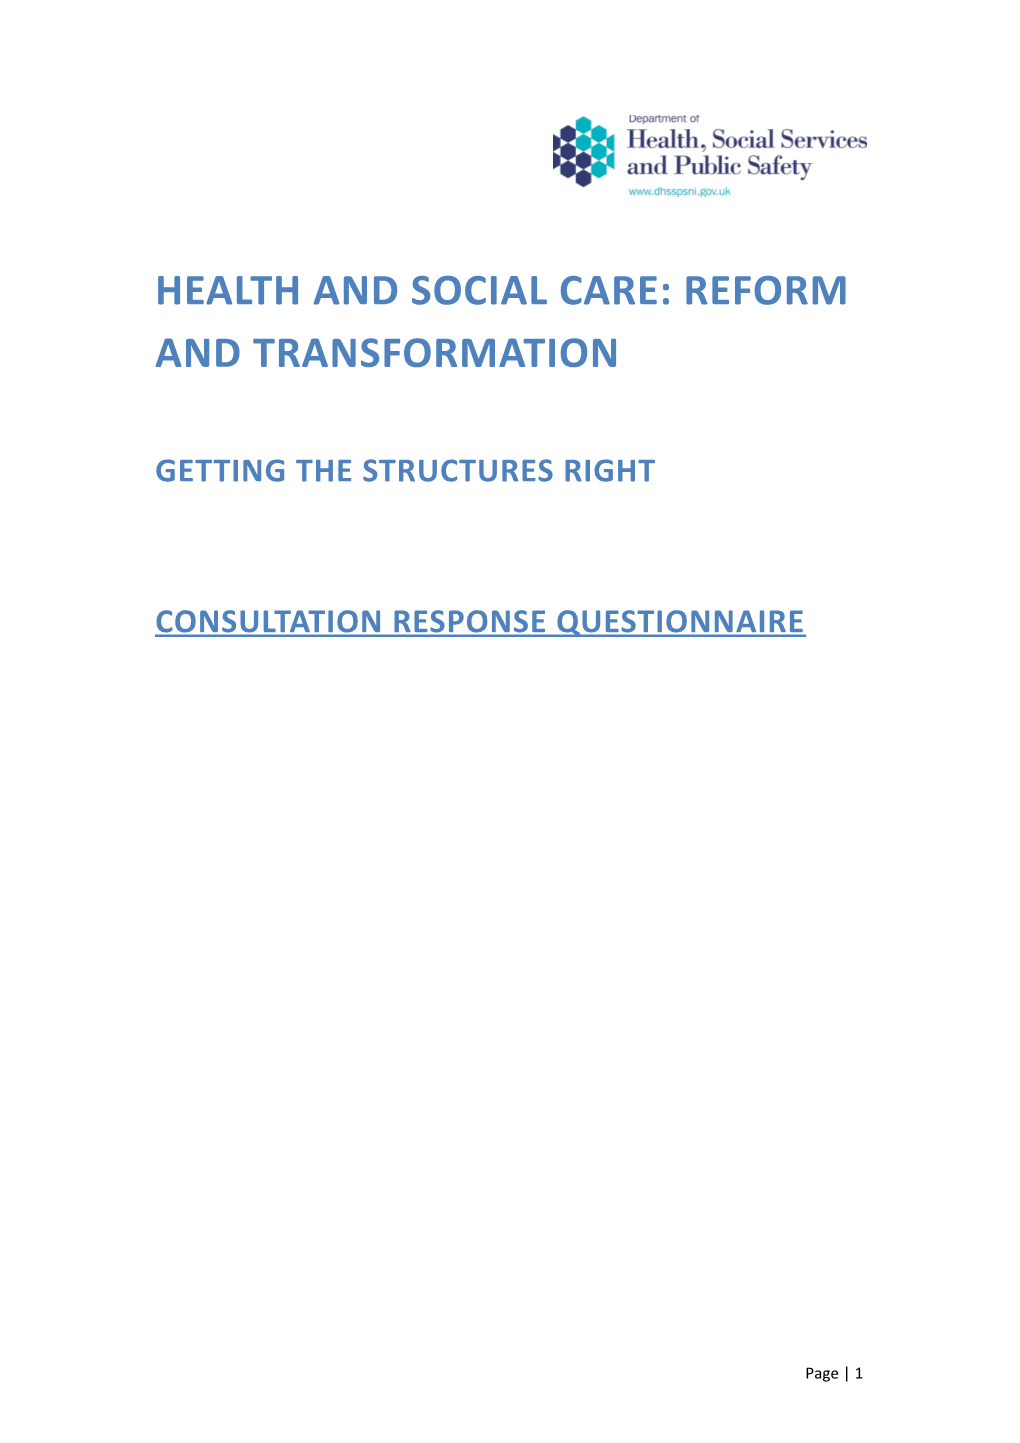 Health and Social Care: Reform and Transformation